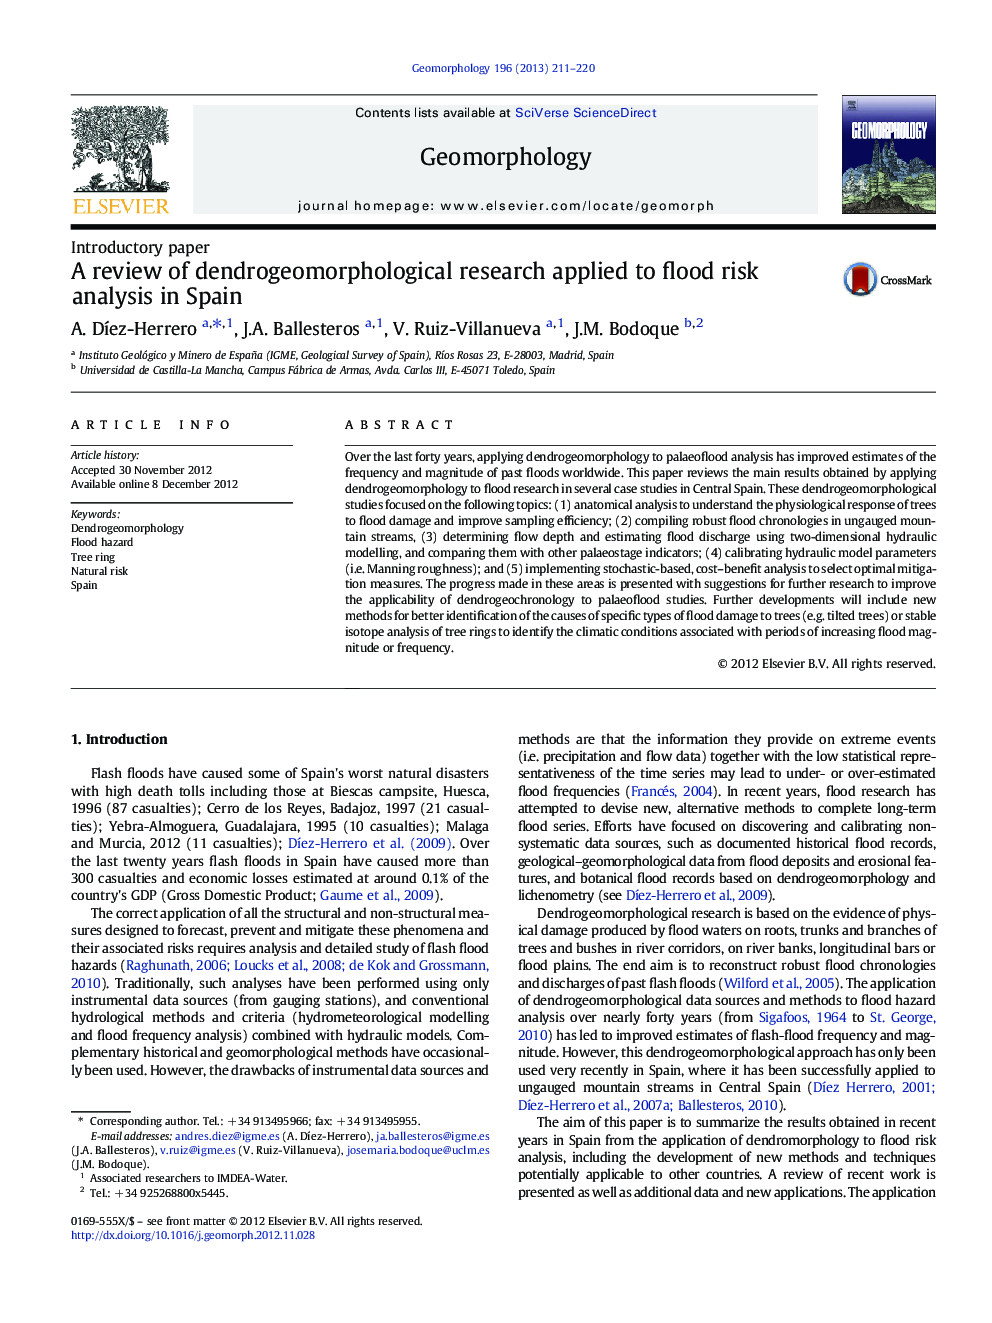 A review of dendrogeomorphological research applied to flood risk analysis in Spain